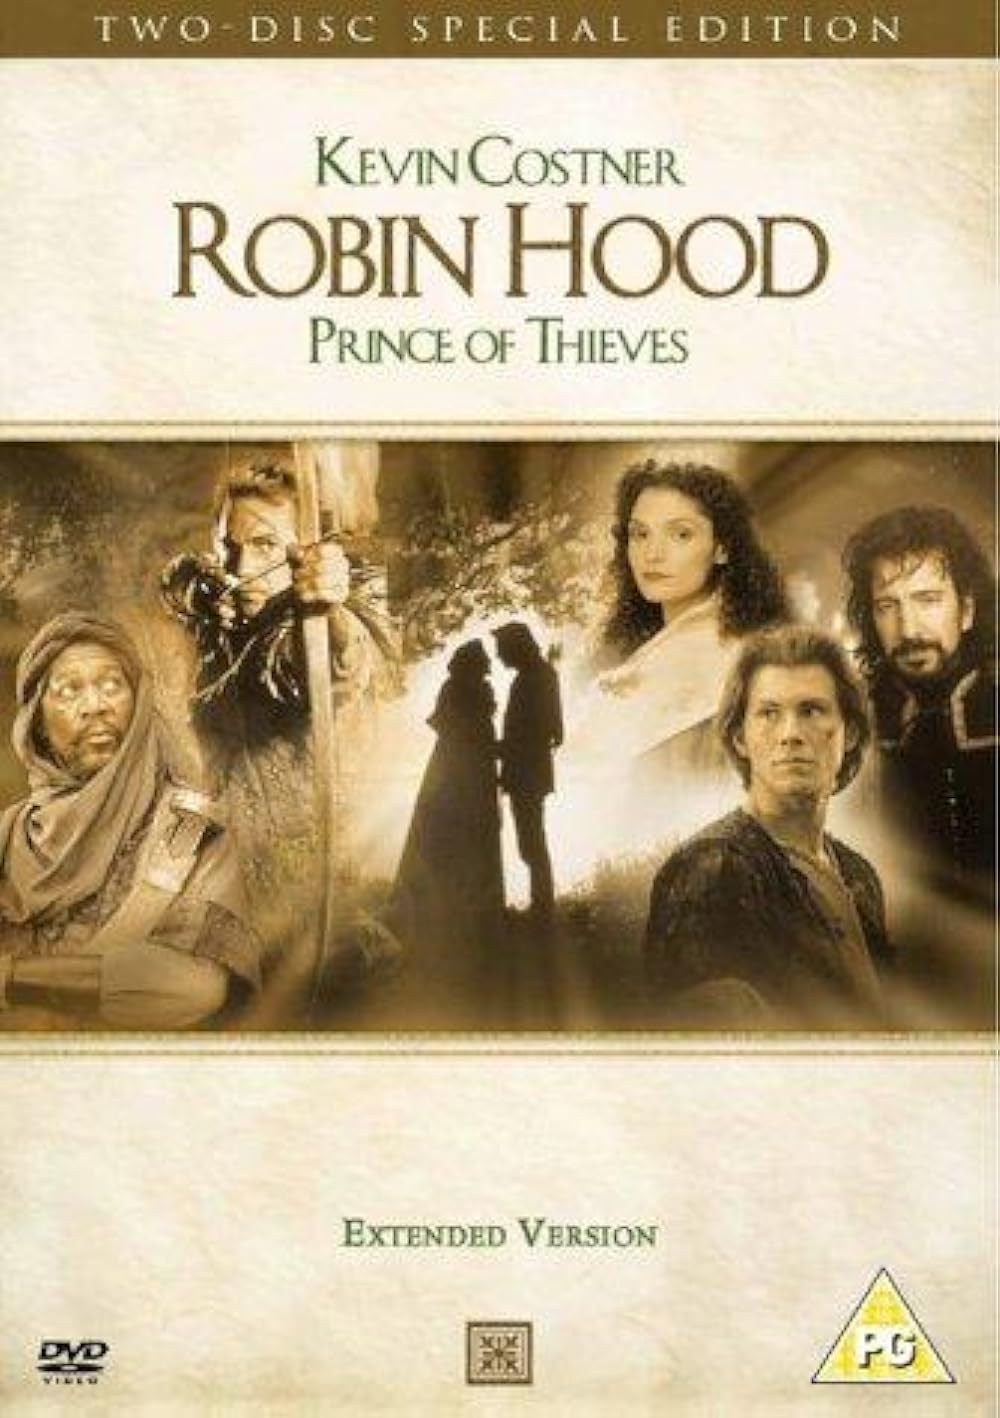 Robin Hood: Prince of Thieves (1991) Extended Cut 192Kbps 23.976Fps 48Khz 2.0Ch DigitalTV Turkish Audio TAC